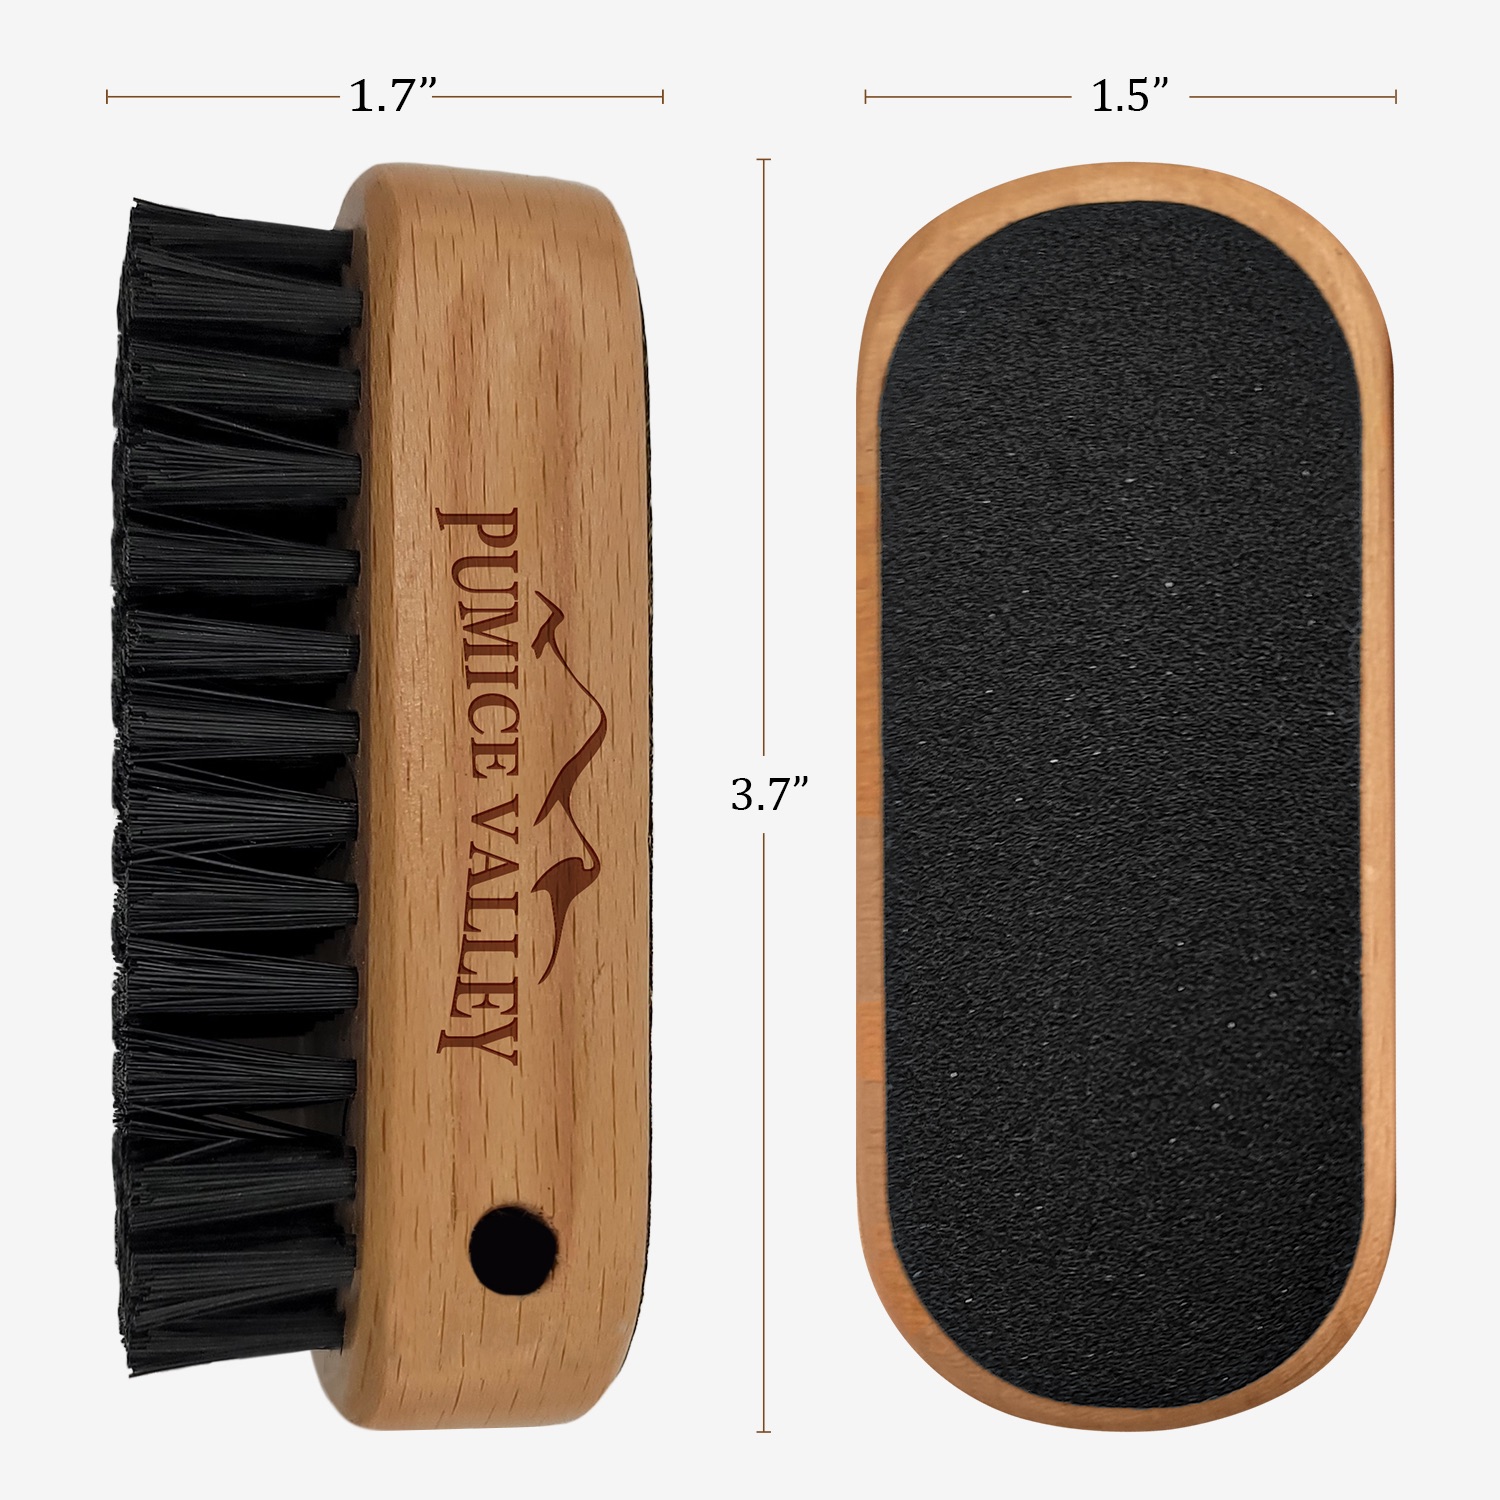 https://www.pumicevalley.com/couch/uploads/image/05-pv-wood-nail-brush-size.jpg